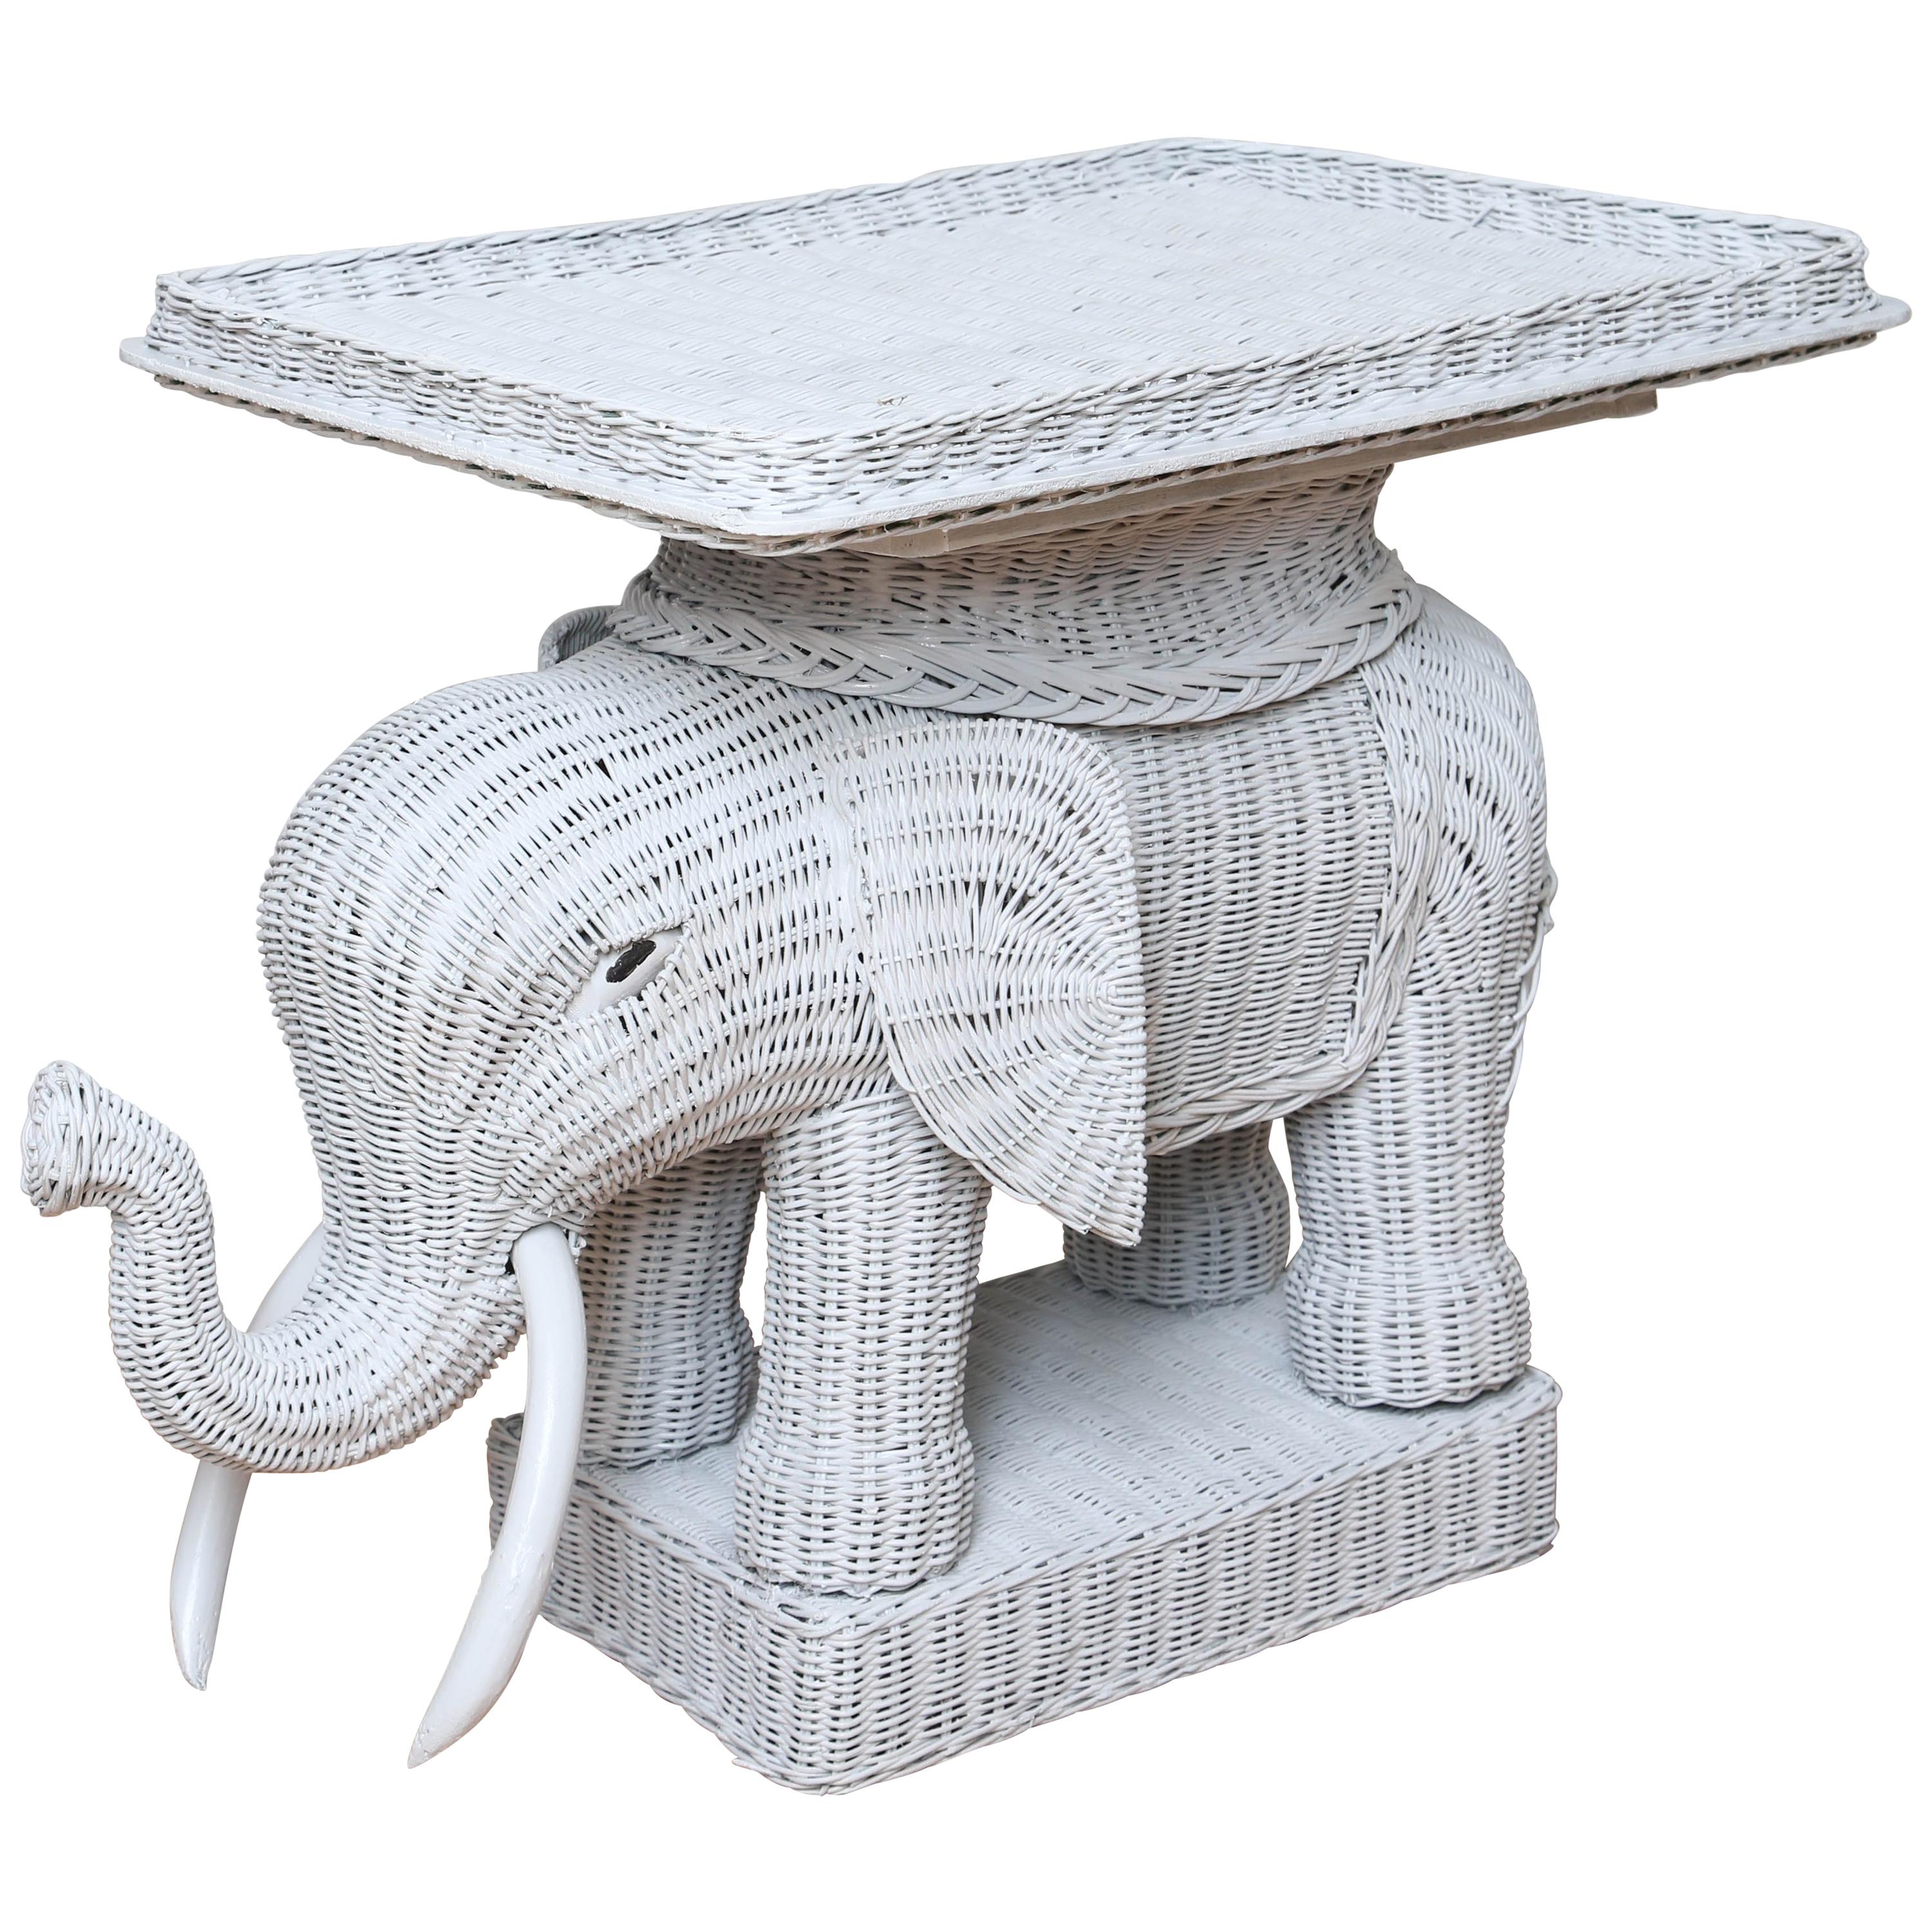 Vintage Wicker Elephant Tray Top Table